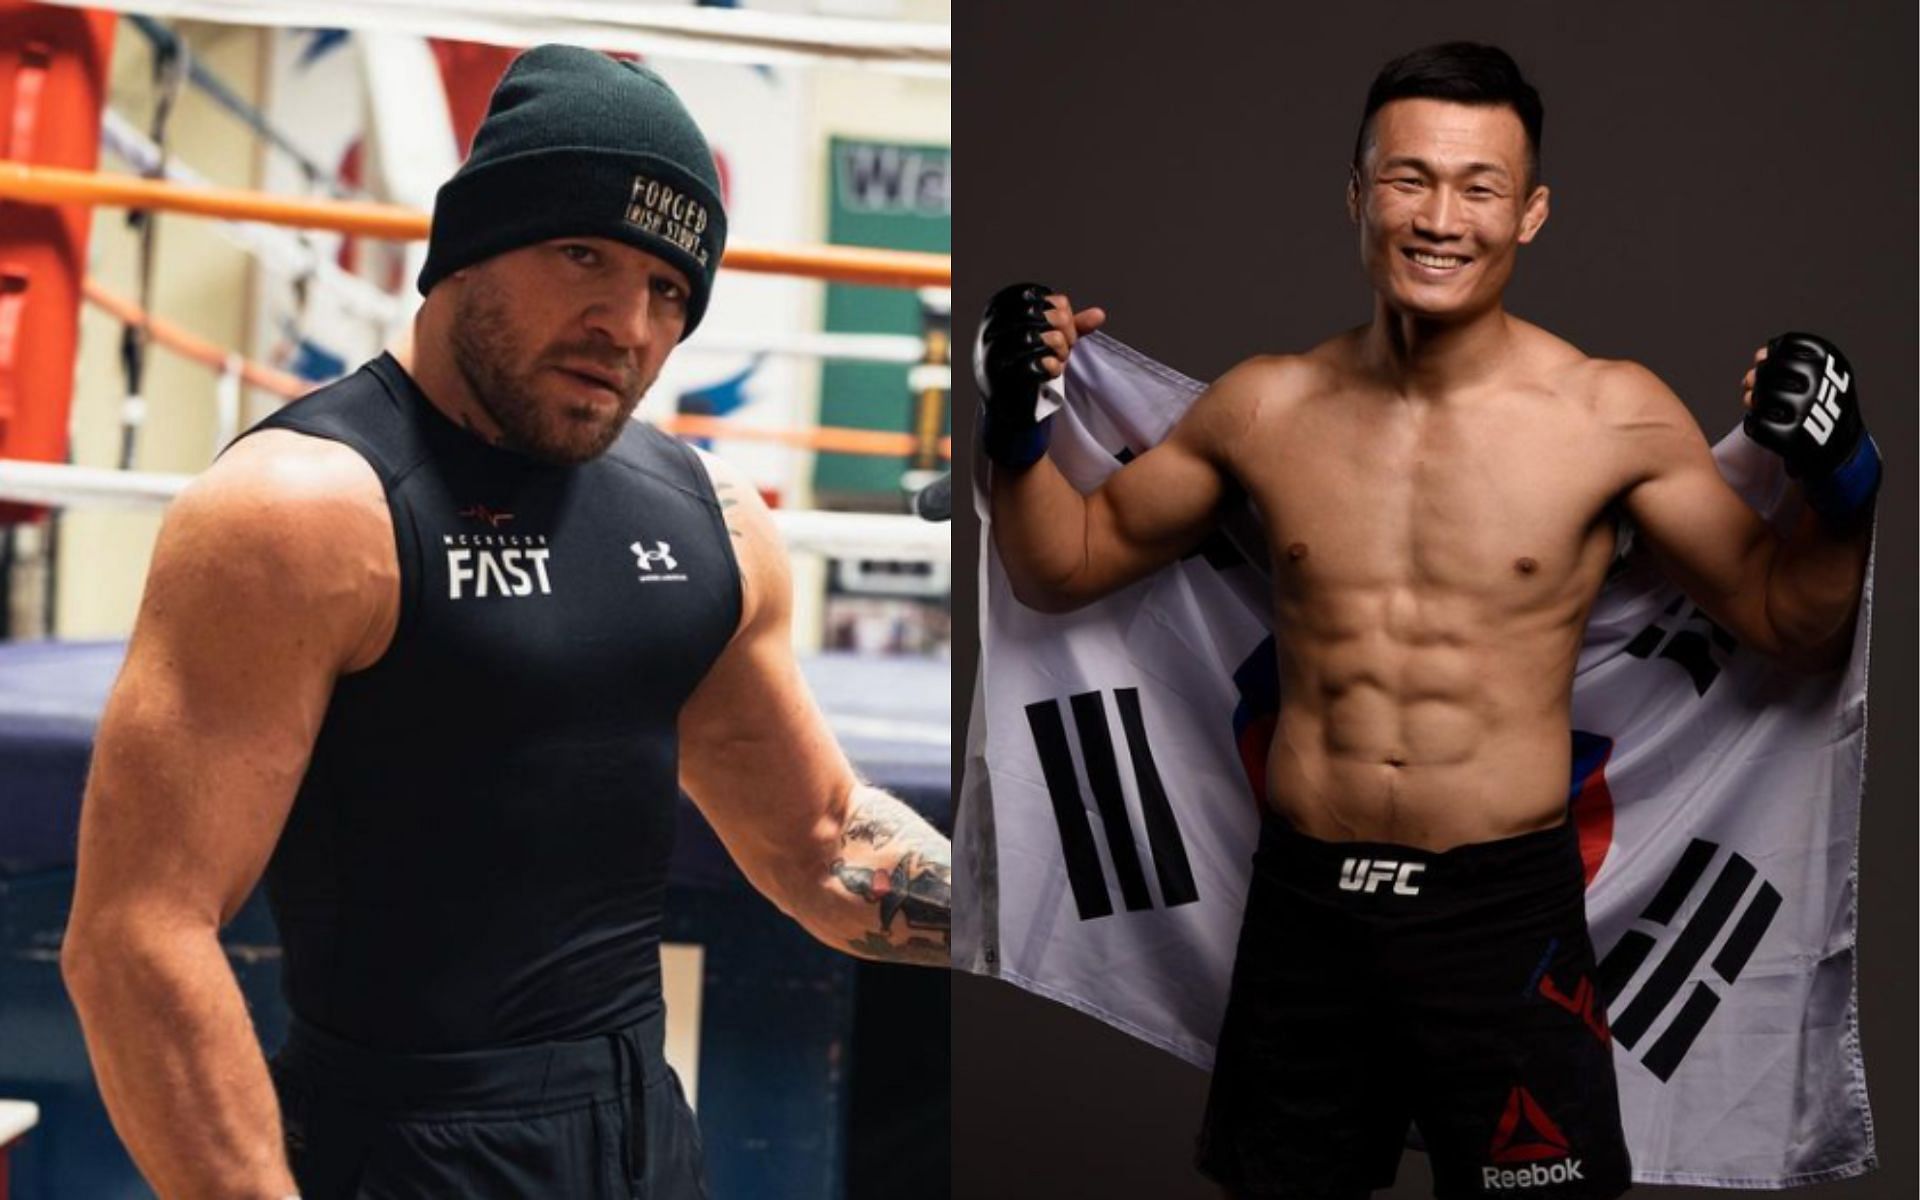 Conor McGregor (Left) and The Korean Zombie (Right) [Images via: @koreanzombiemma and @thenotoriousmma on Instagram]